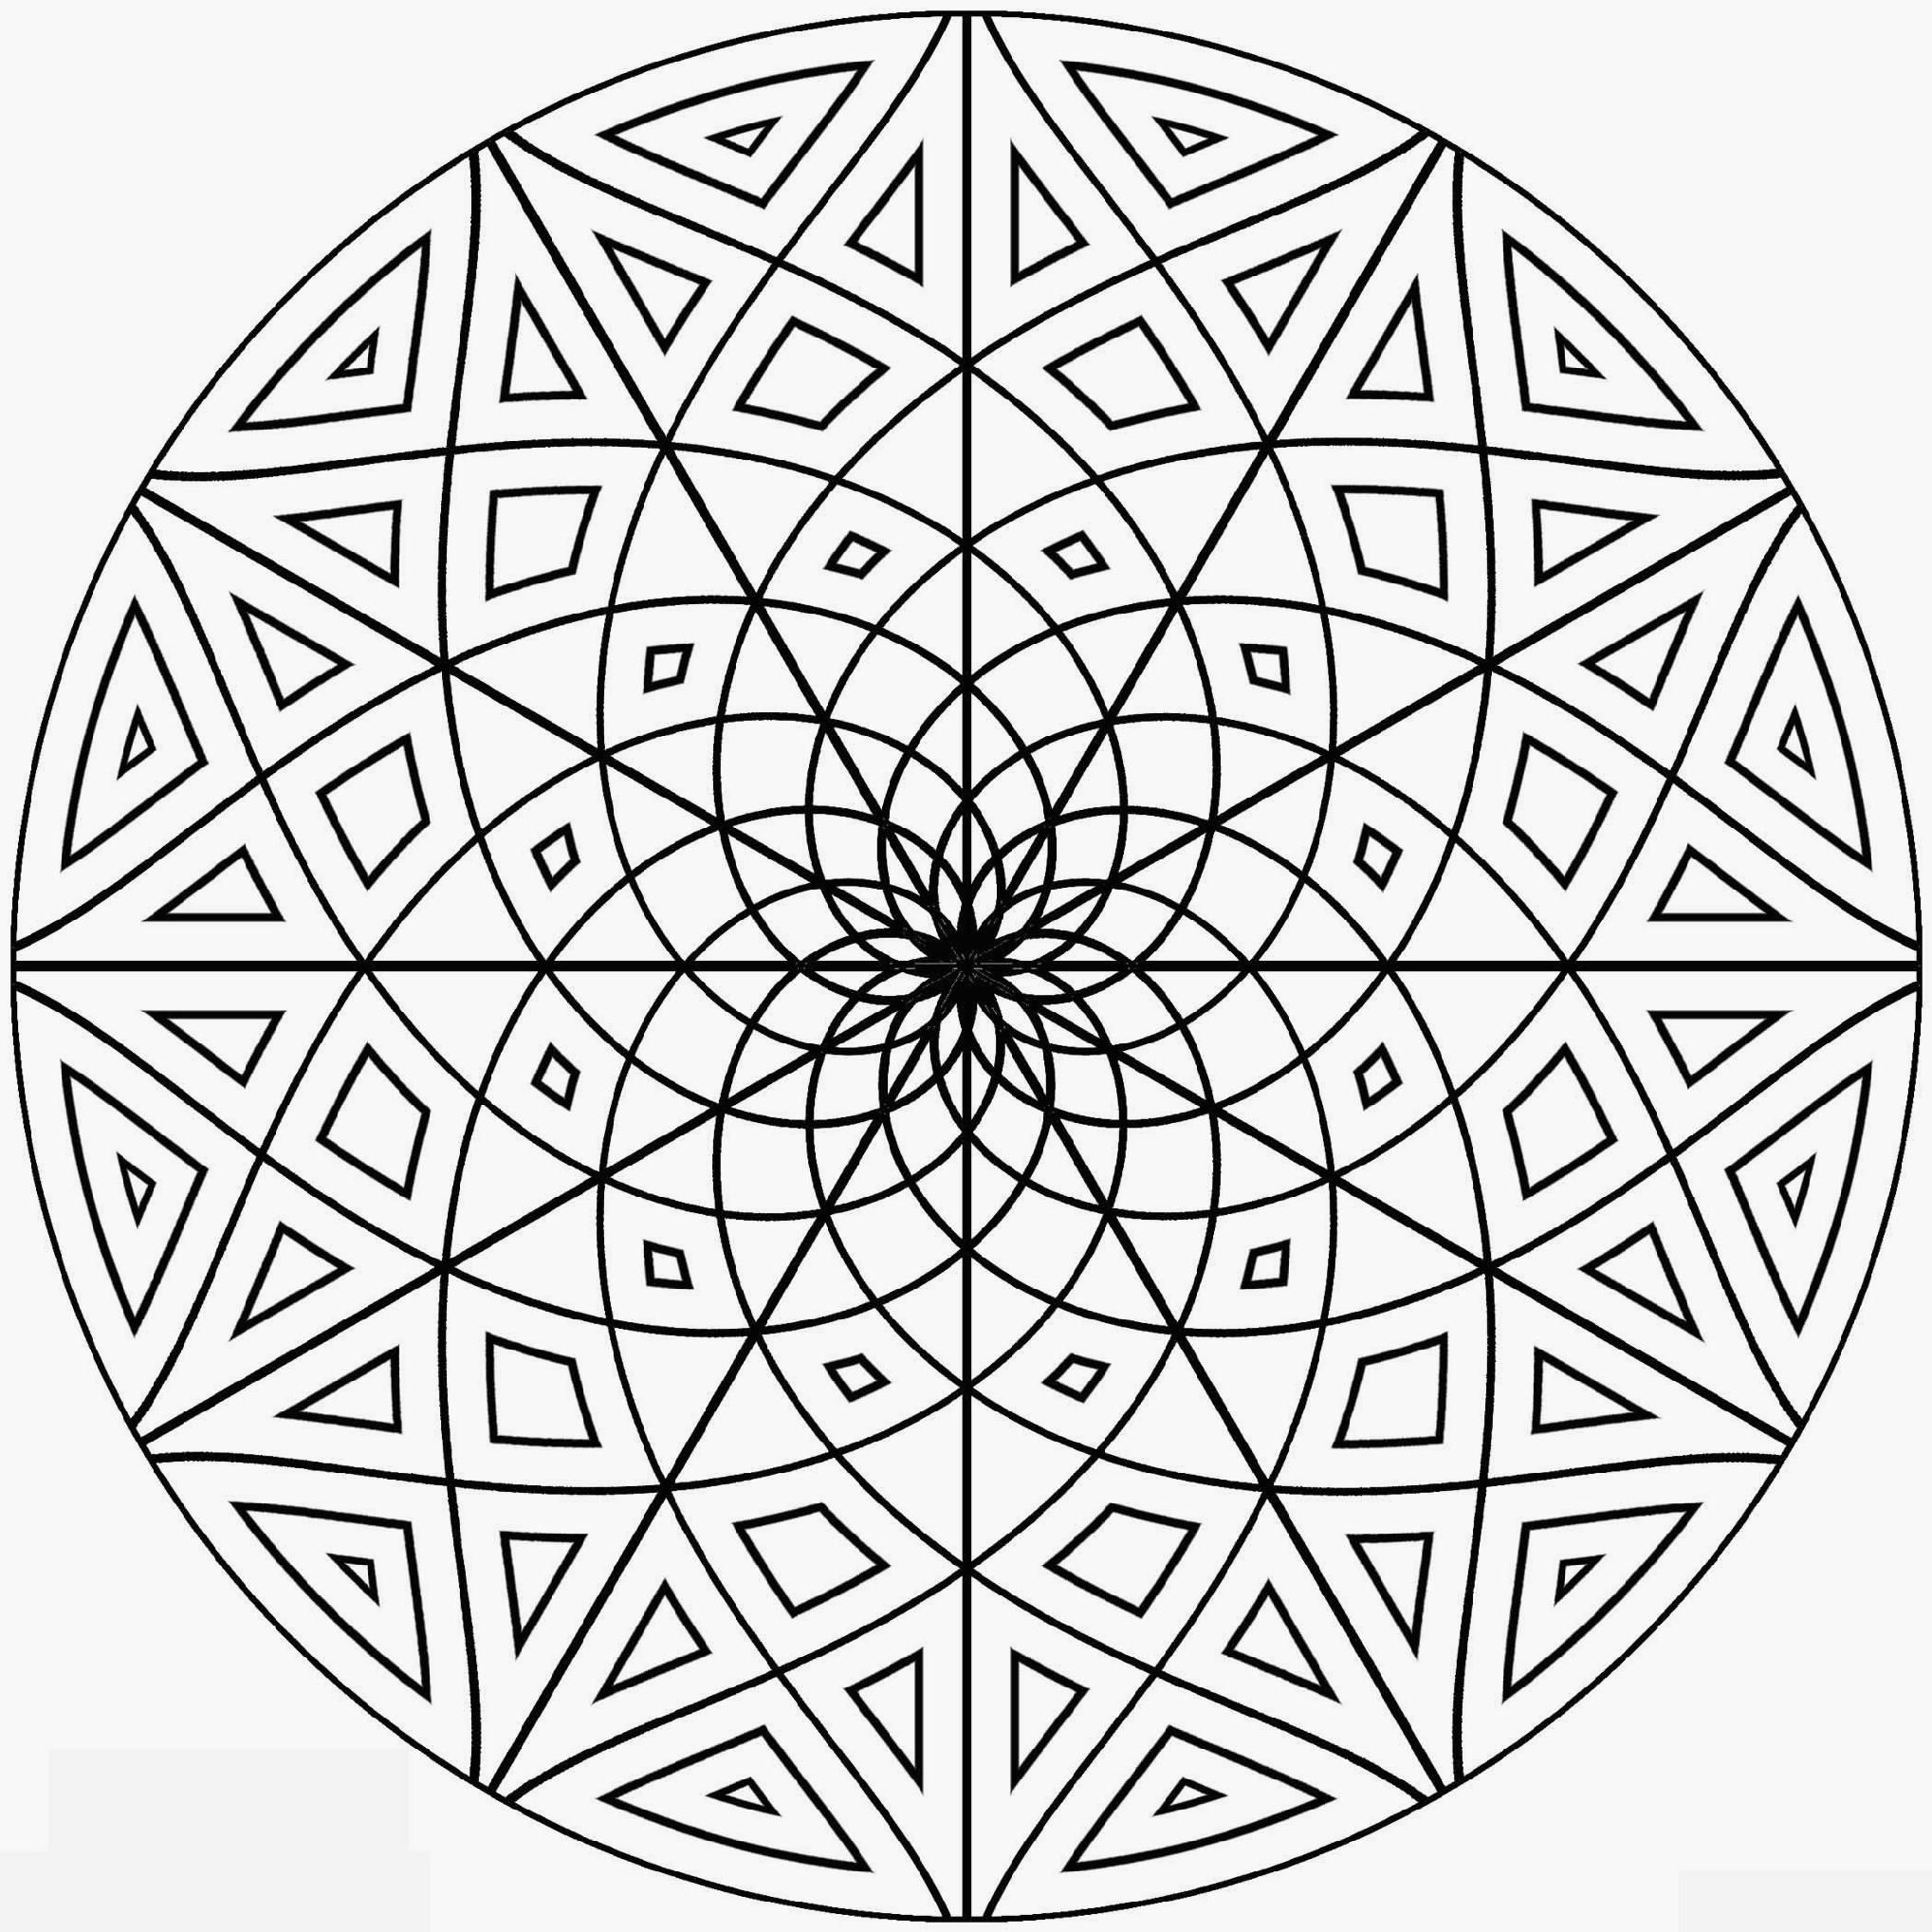 Coloring Pages: Printable Mandala & Abstract Colouring Pages For ...